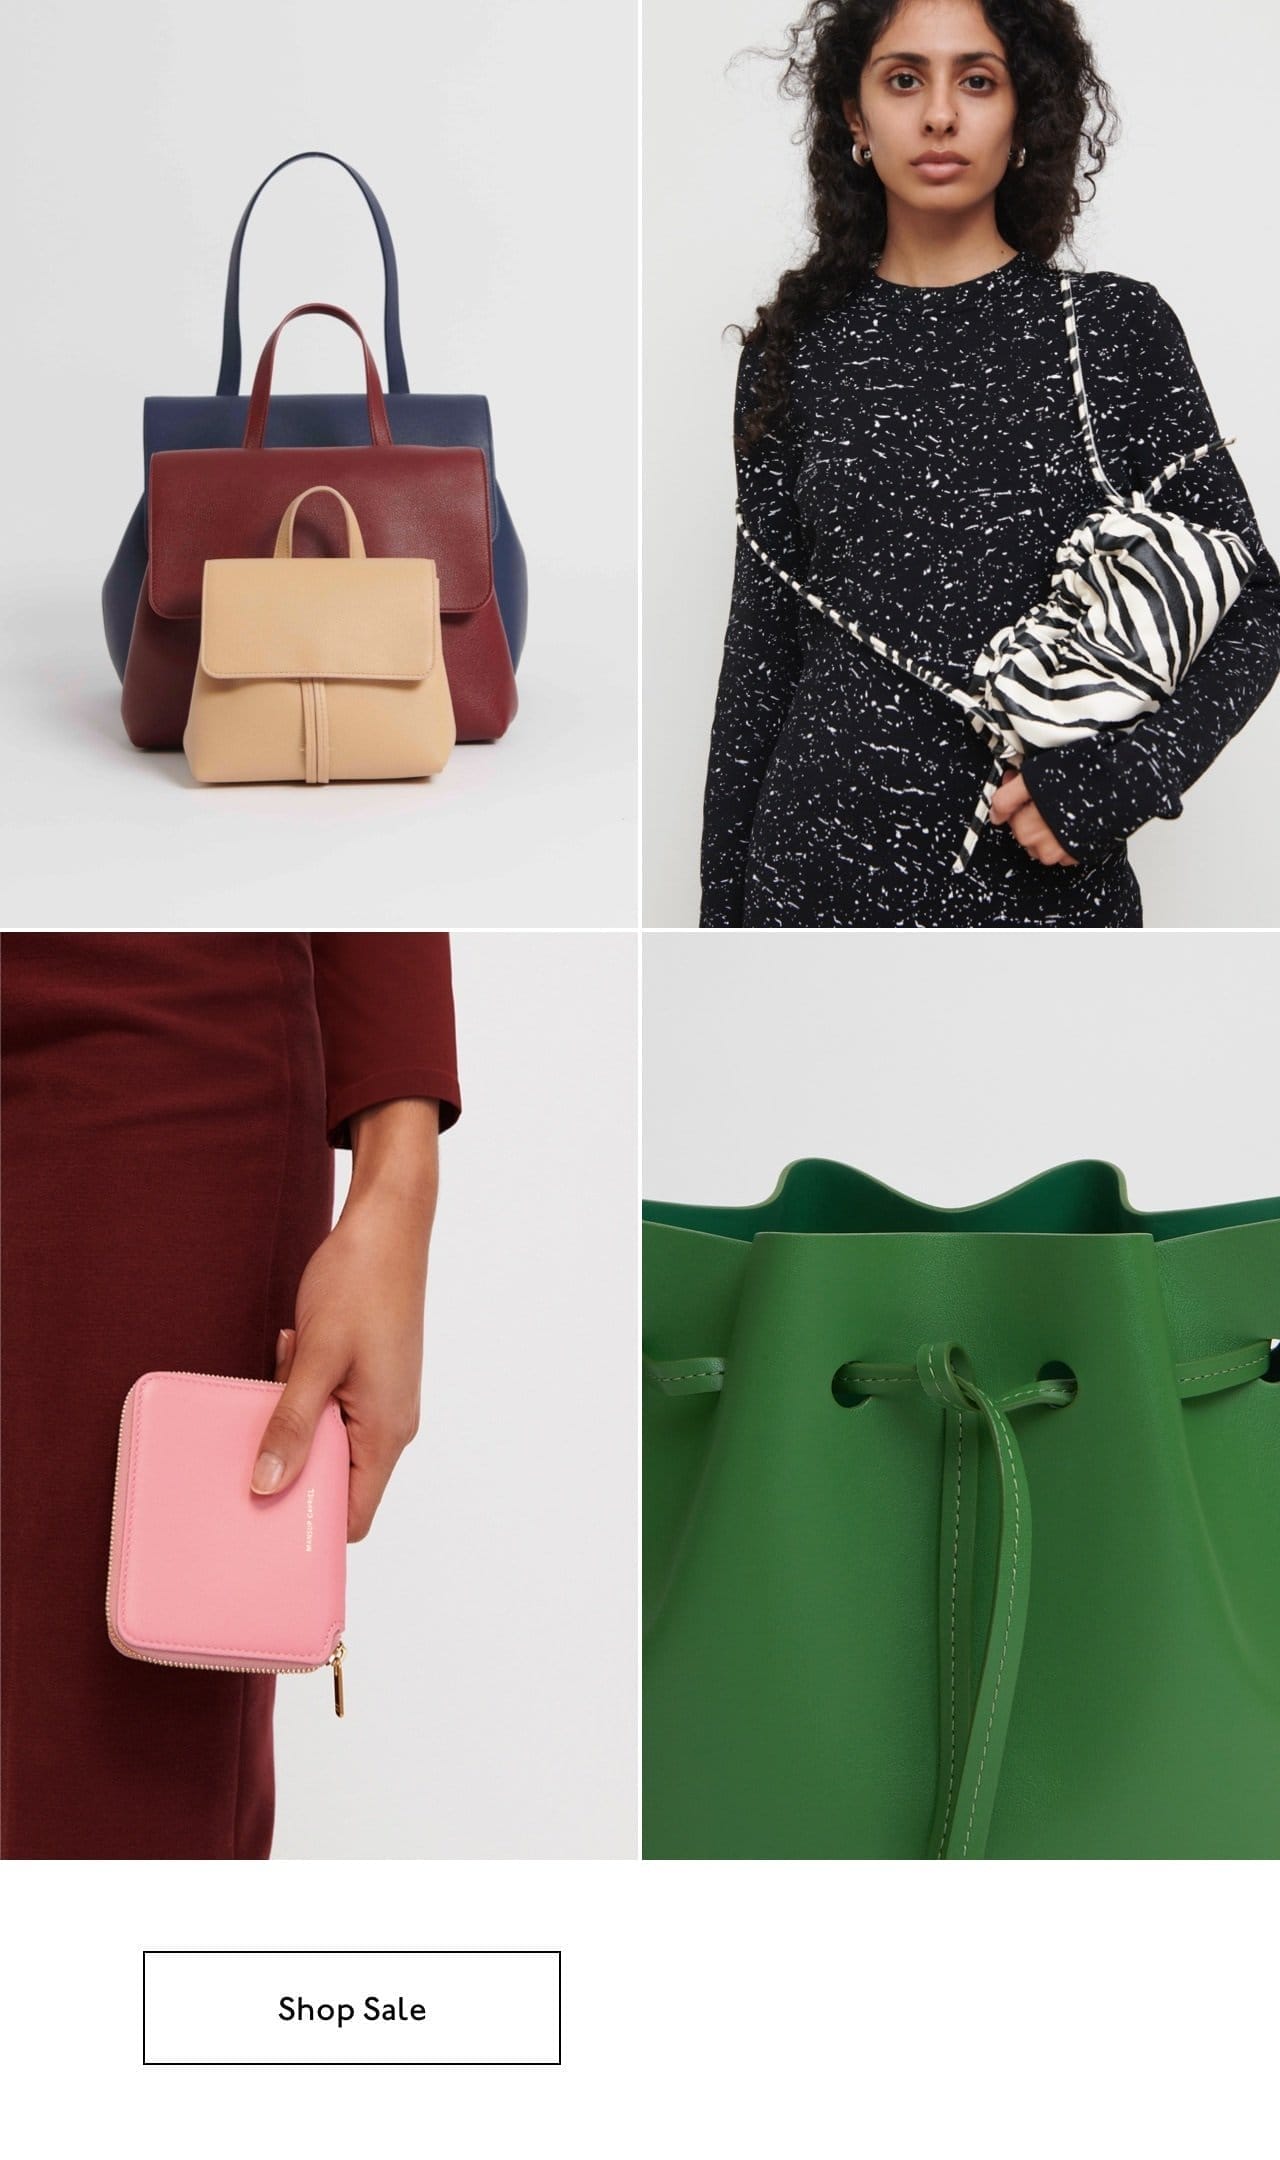 Pictured: new sale styles such as the Soft Lady bag family, the Mini Cloud Clutch in Zebra, the Zip Card Case in Flamingo, and the Vegan Apple Bucket in Jade.